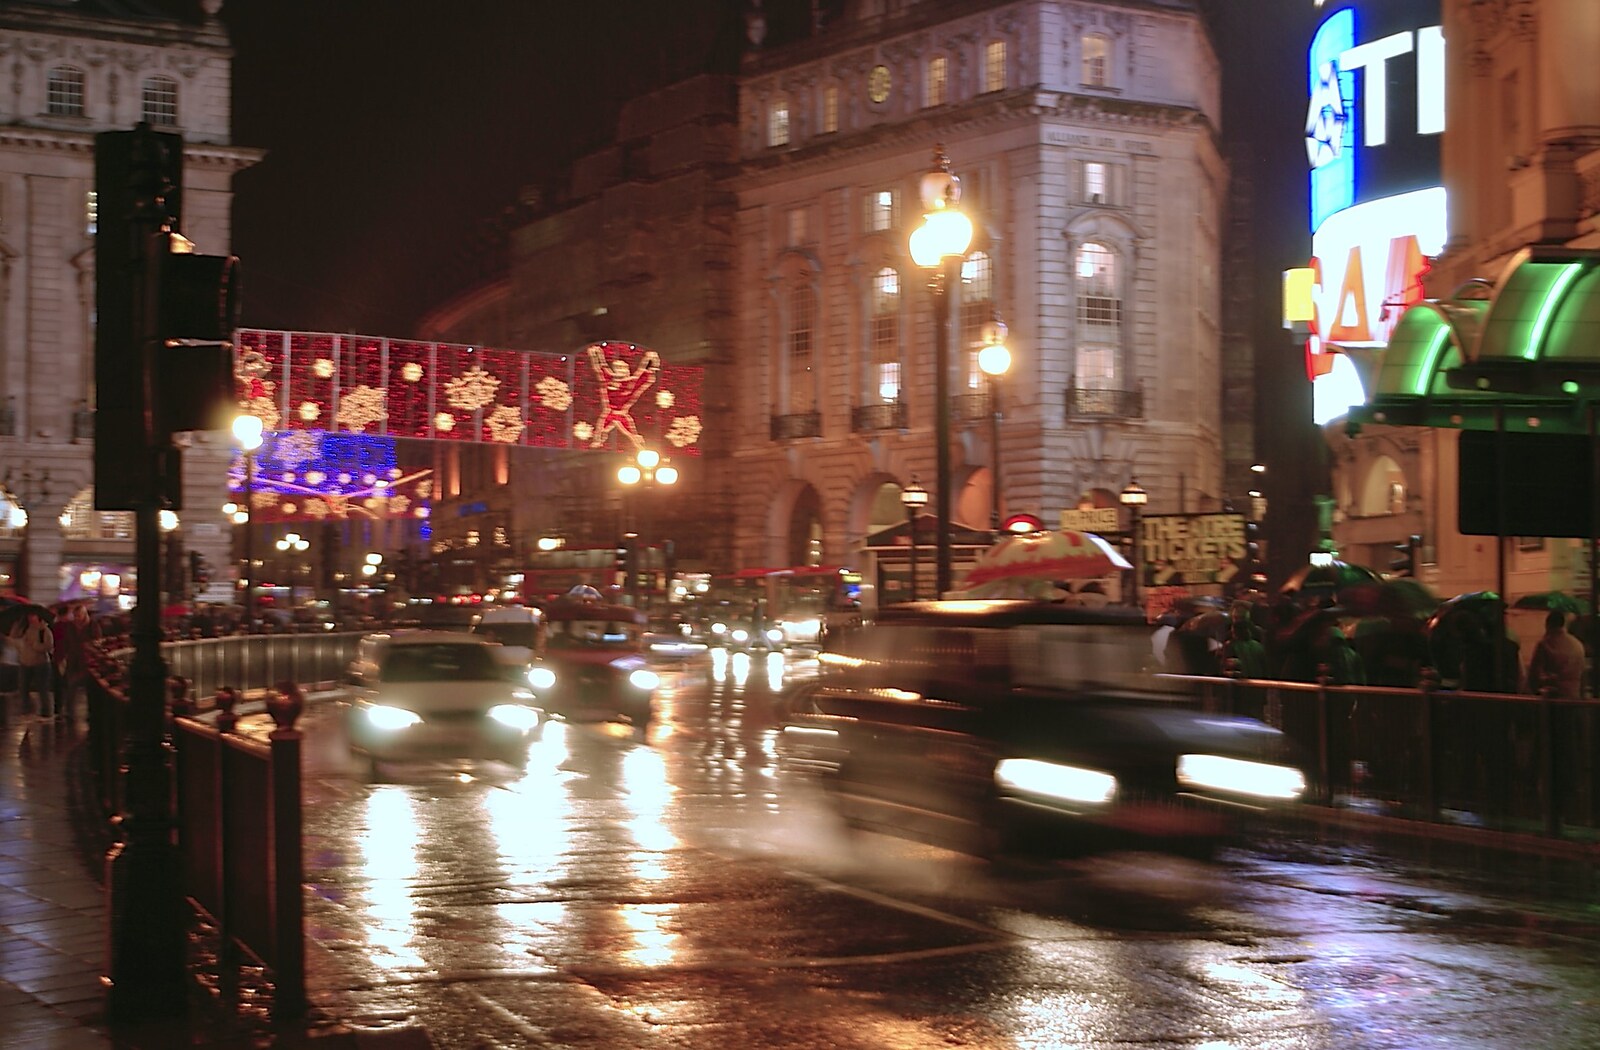 Looking back at Picadilly Circus from London in the Rain - 18th November 2004